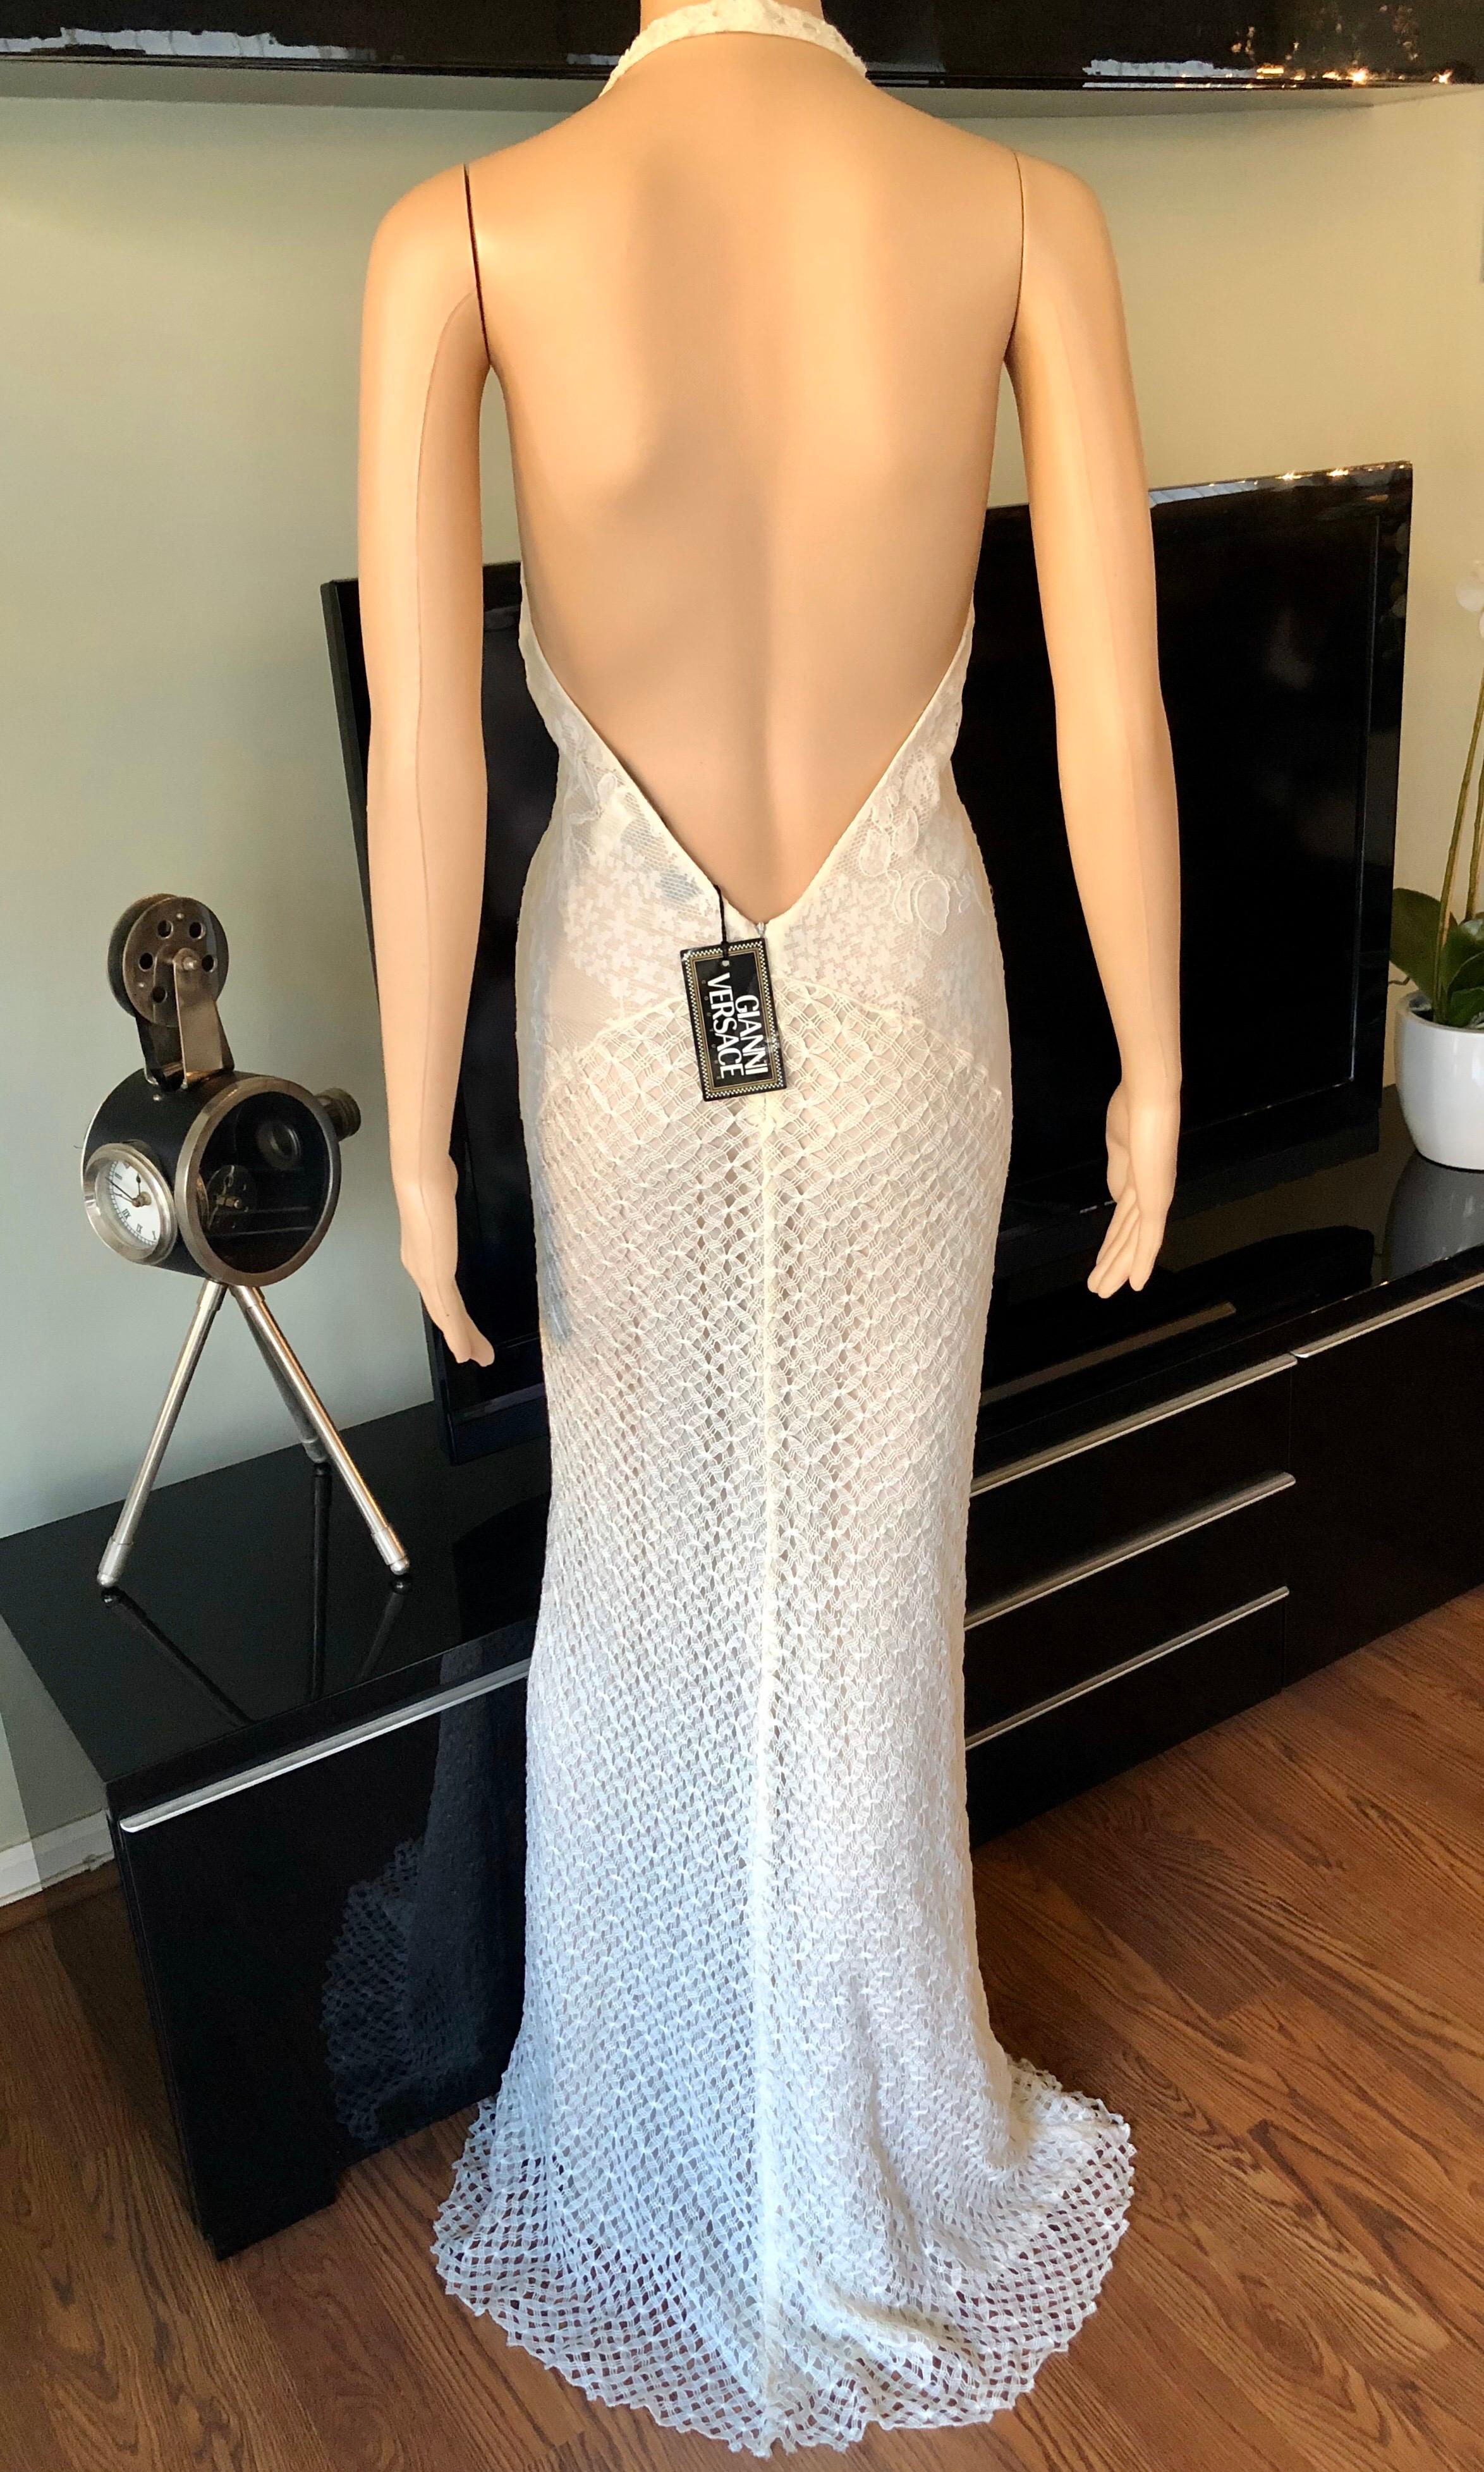 NWT Gianni Versace S/S 2002 Plunging Backless Semi Sheer Lace Ivory Dress Gown 1